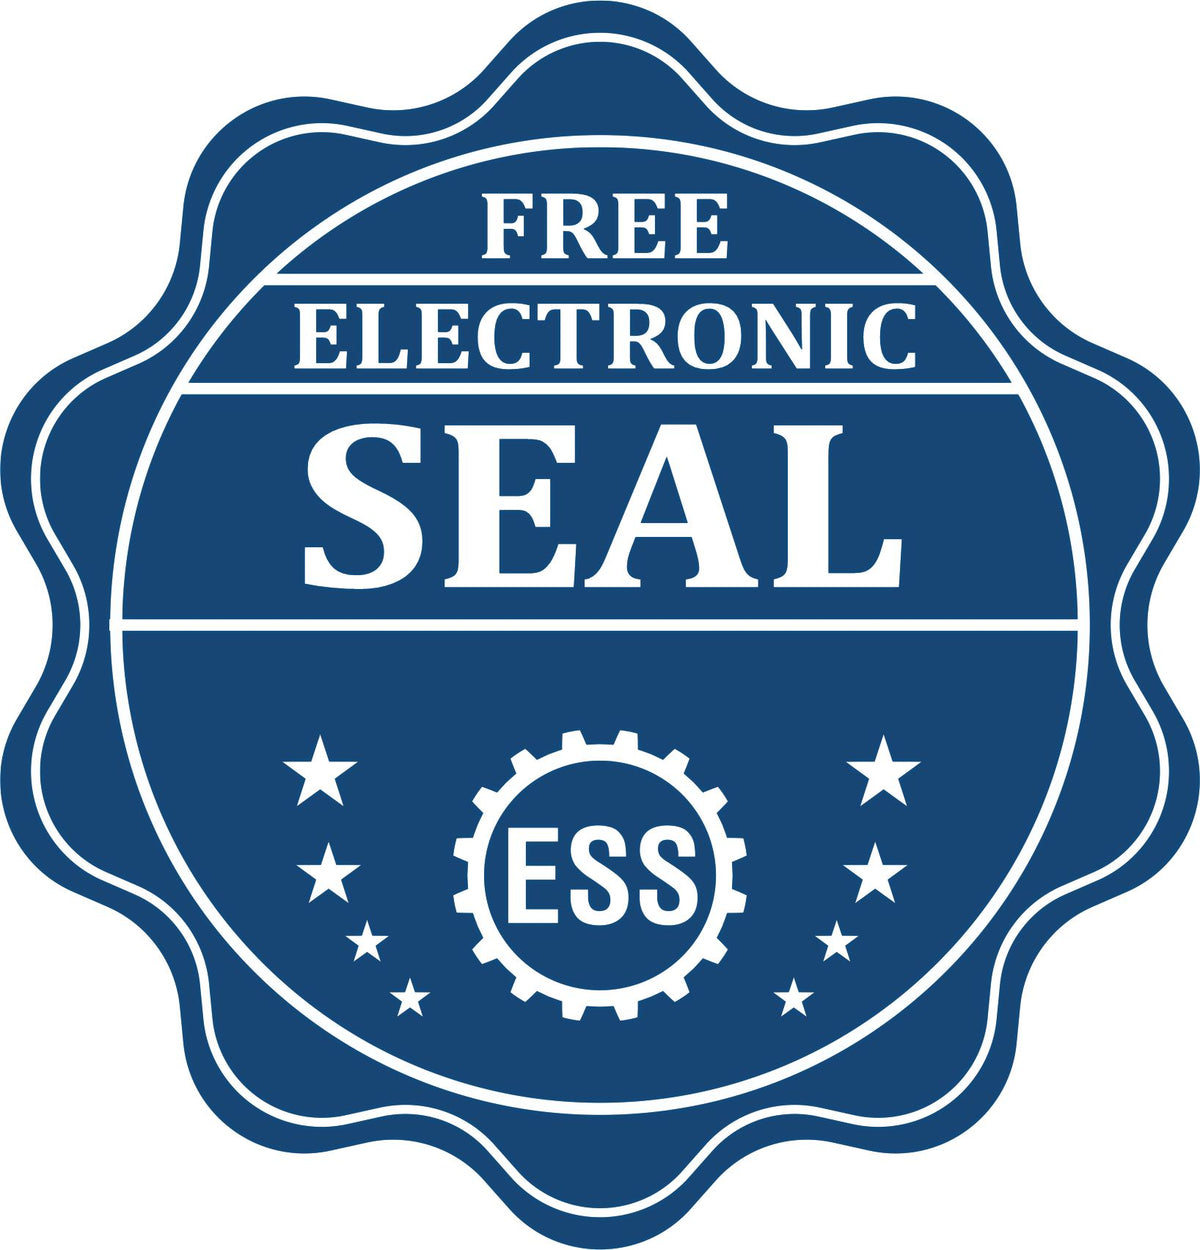 A badge showing a free electronic seal for the Handheld Michigan Land Surveyor Seal with stars and the ESS gear on the emblem.